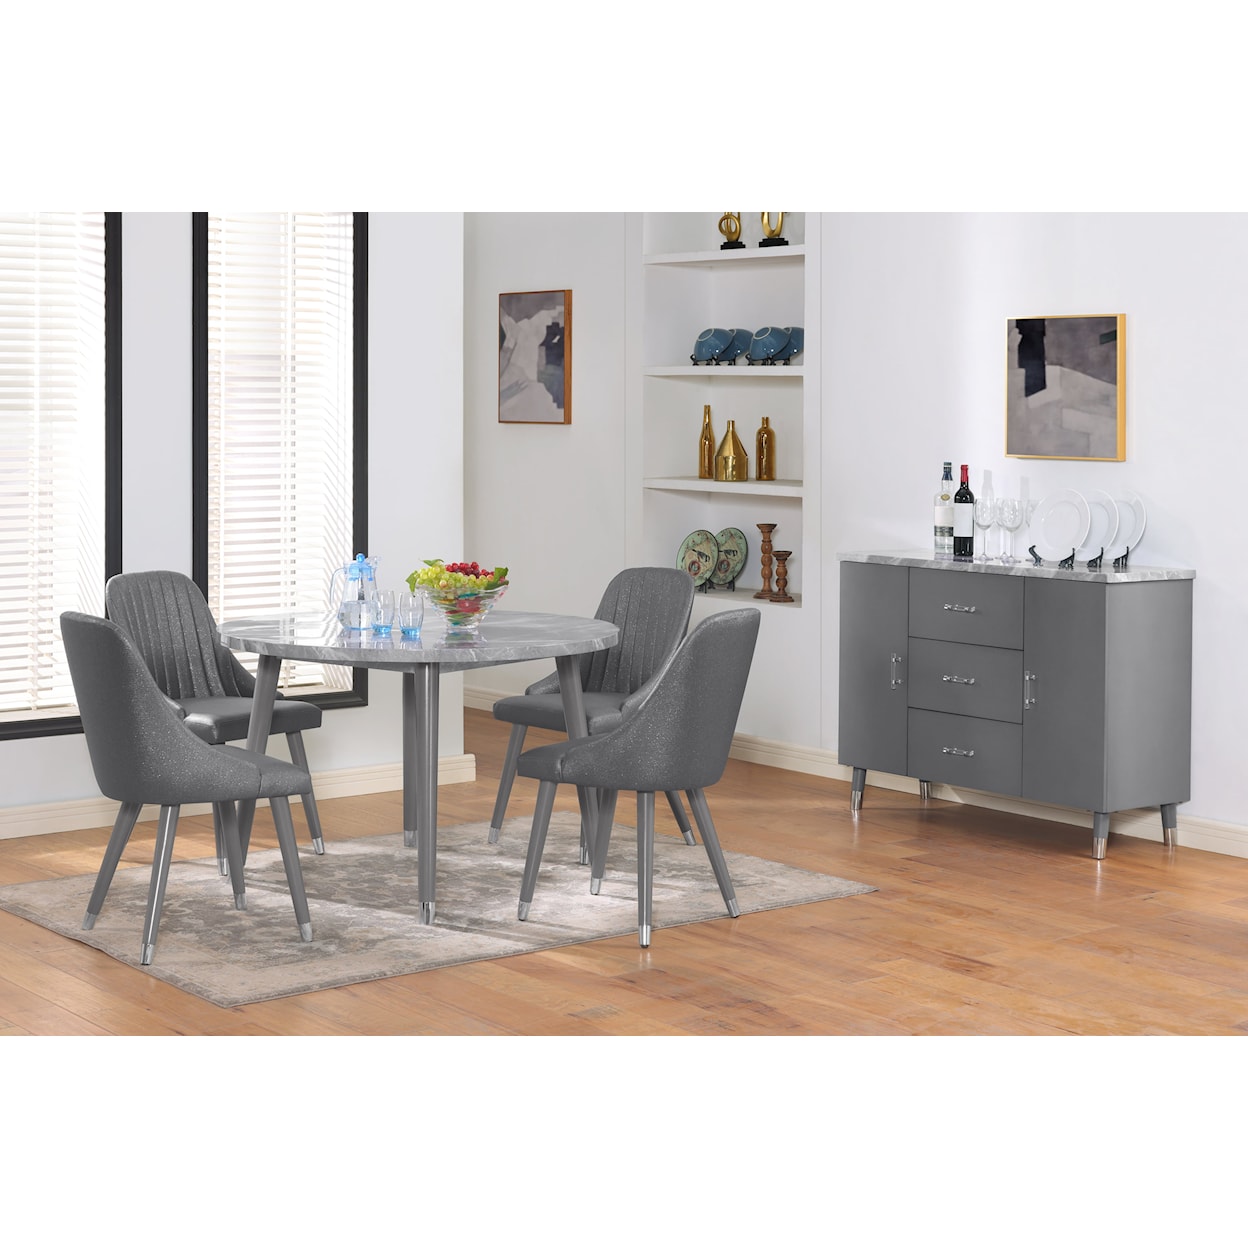 New Classic Mirage Dining Room Group